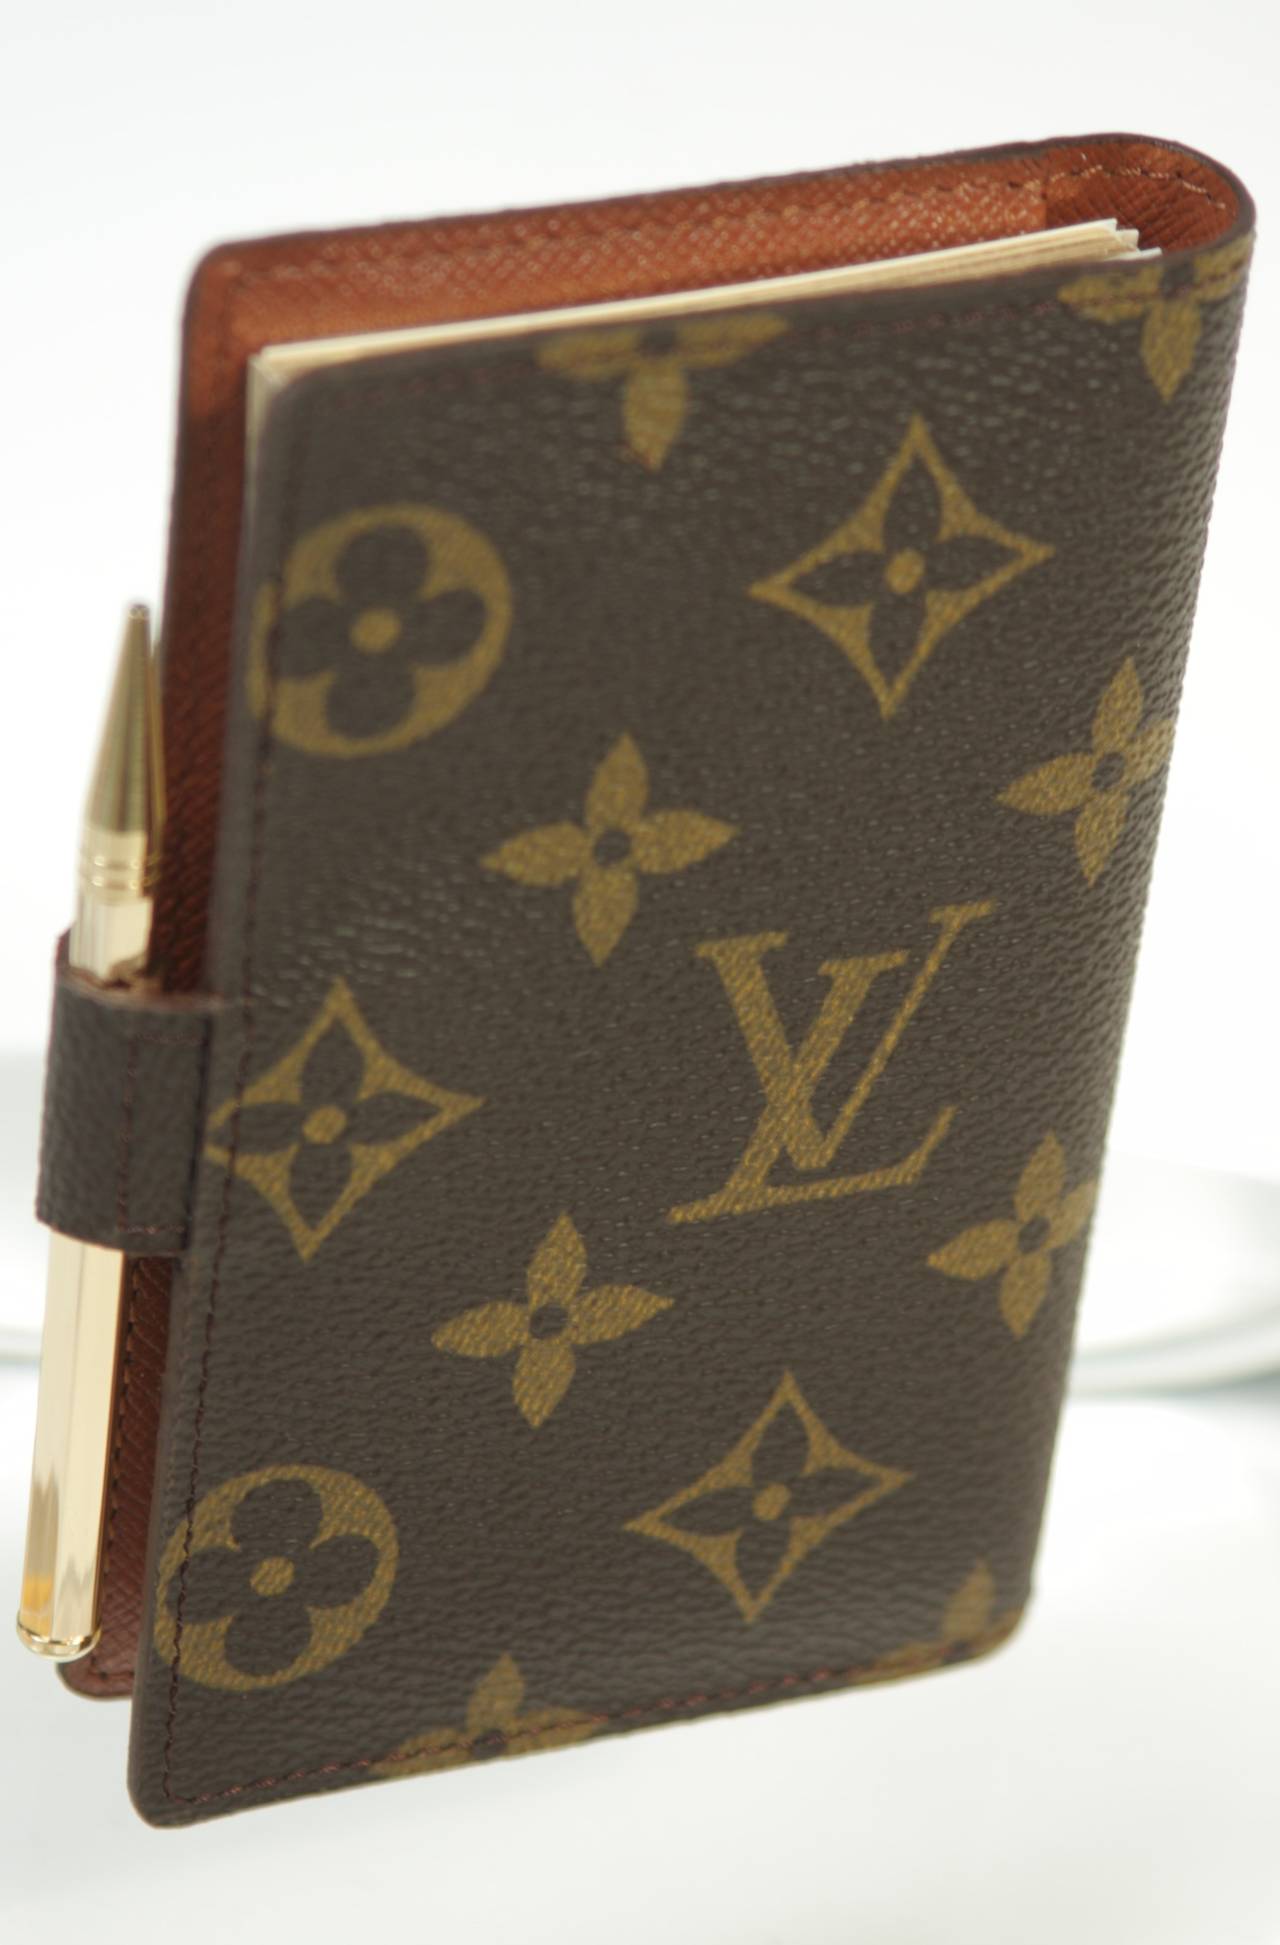 Louis Vuitton Small Monogram Agenda with Pencil and Original Box 1999 at 1stdibs